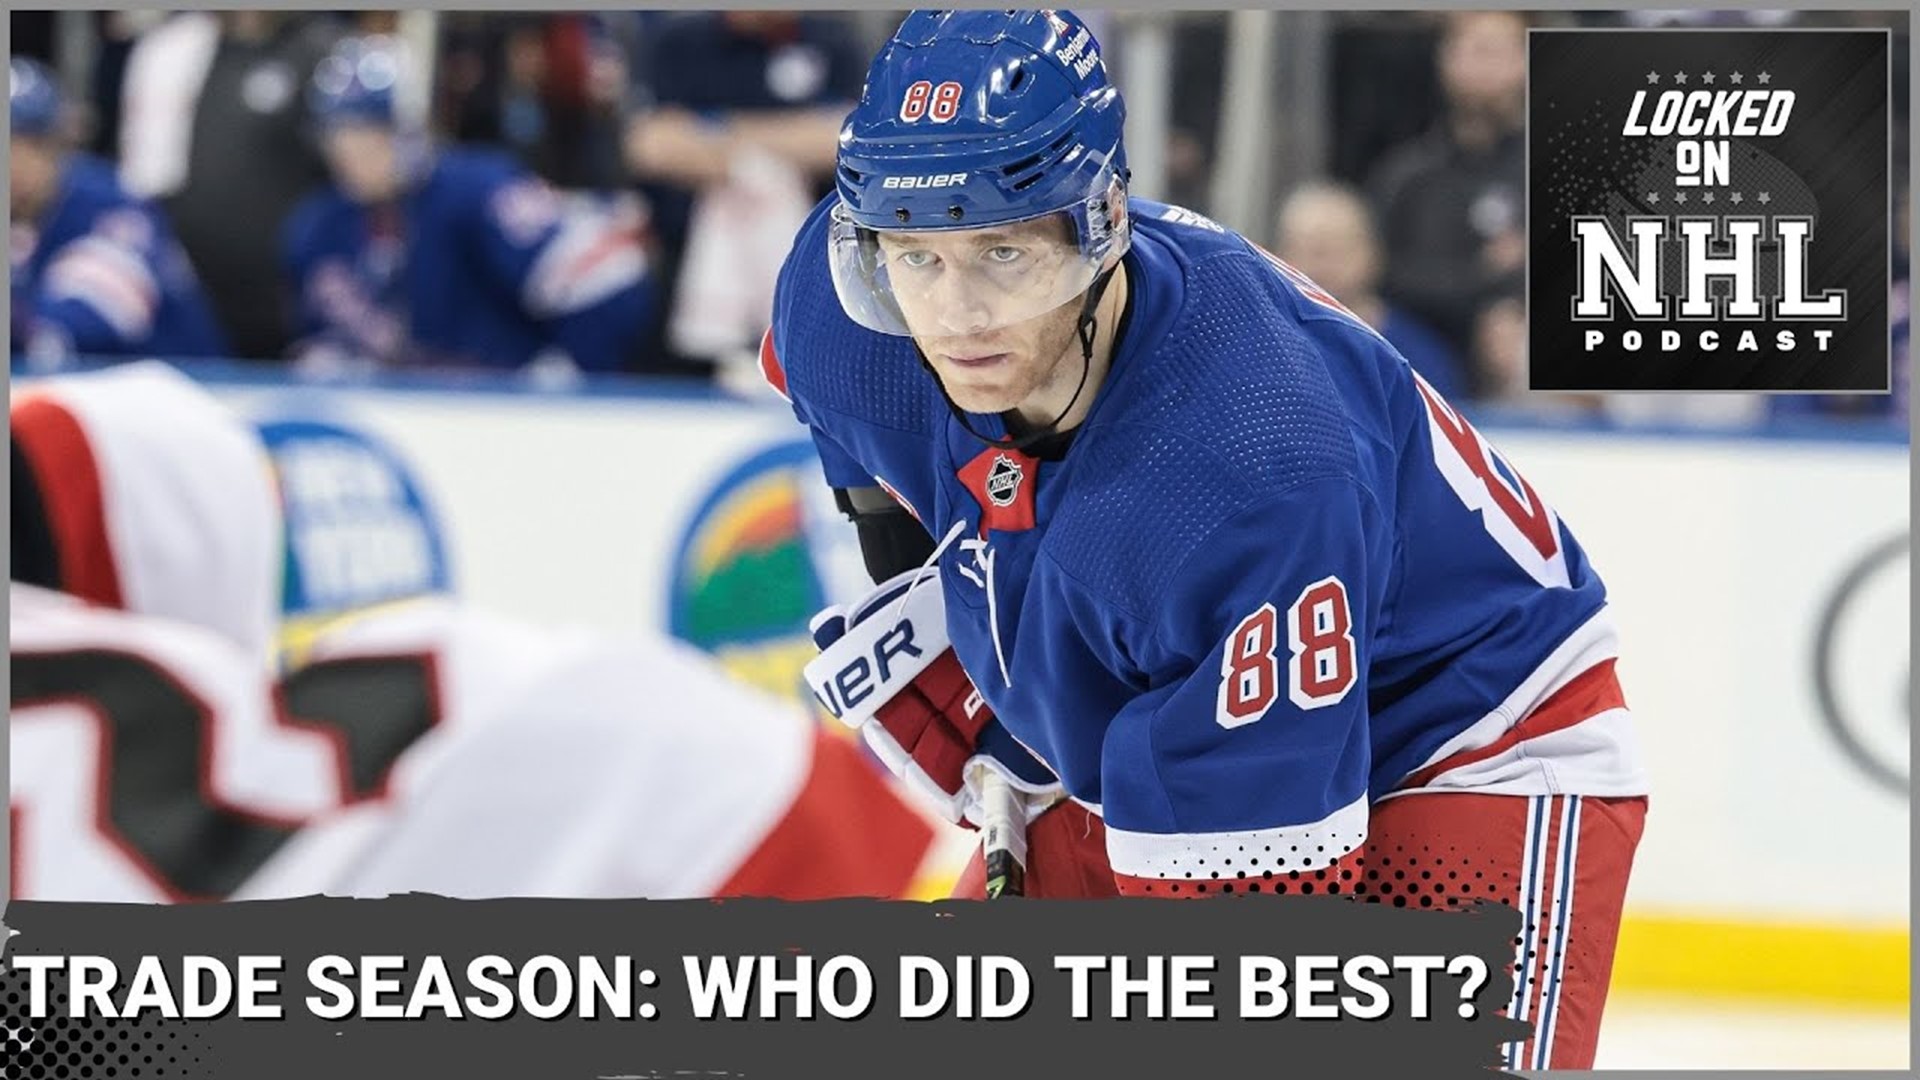 Power Ranking the Teams Who Have Done the Best During the Trade Season So Far